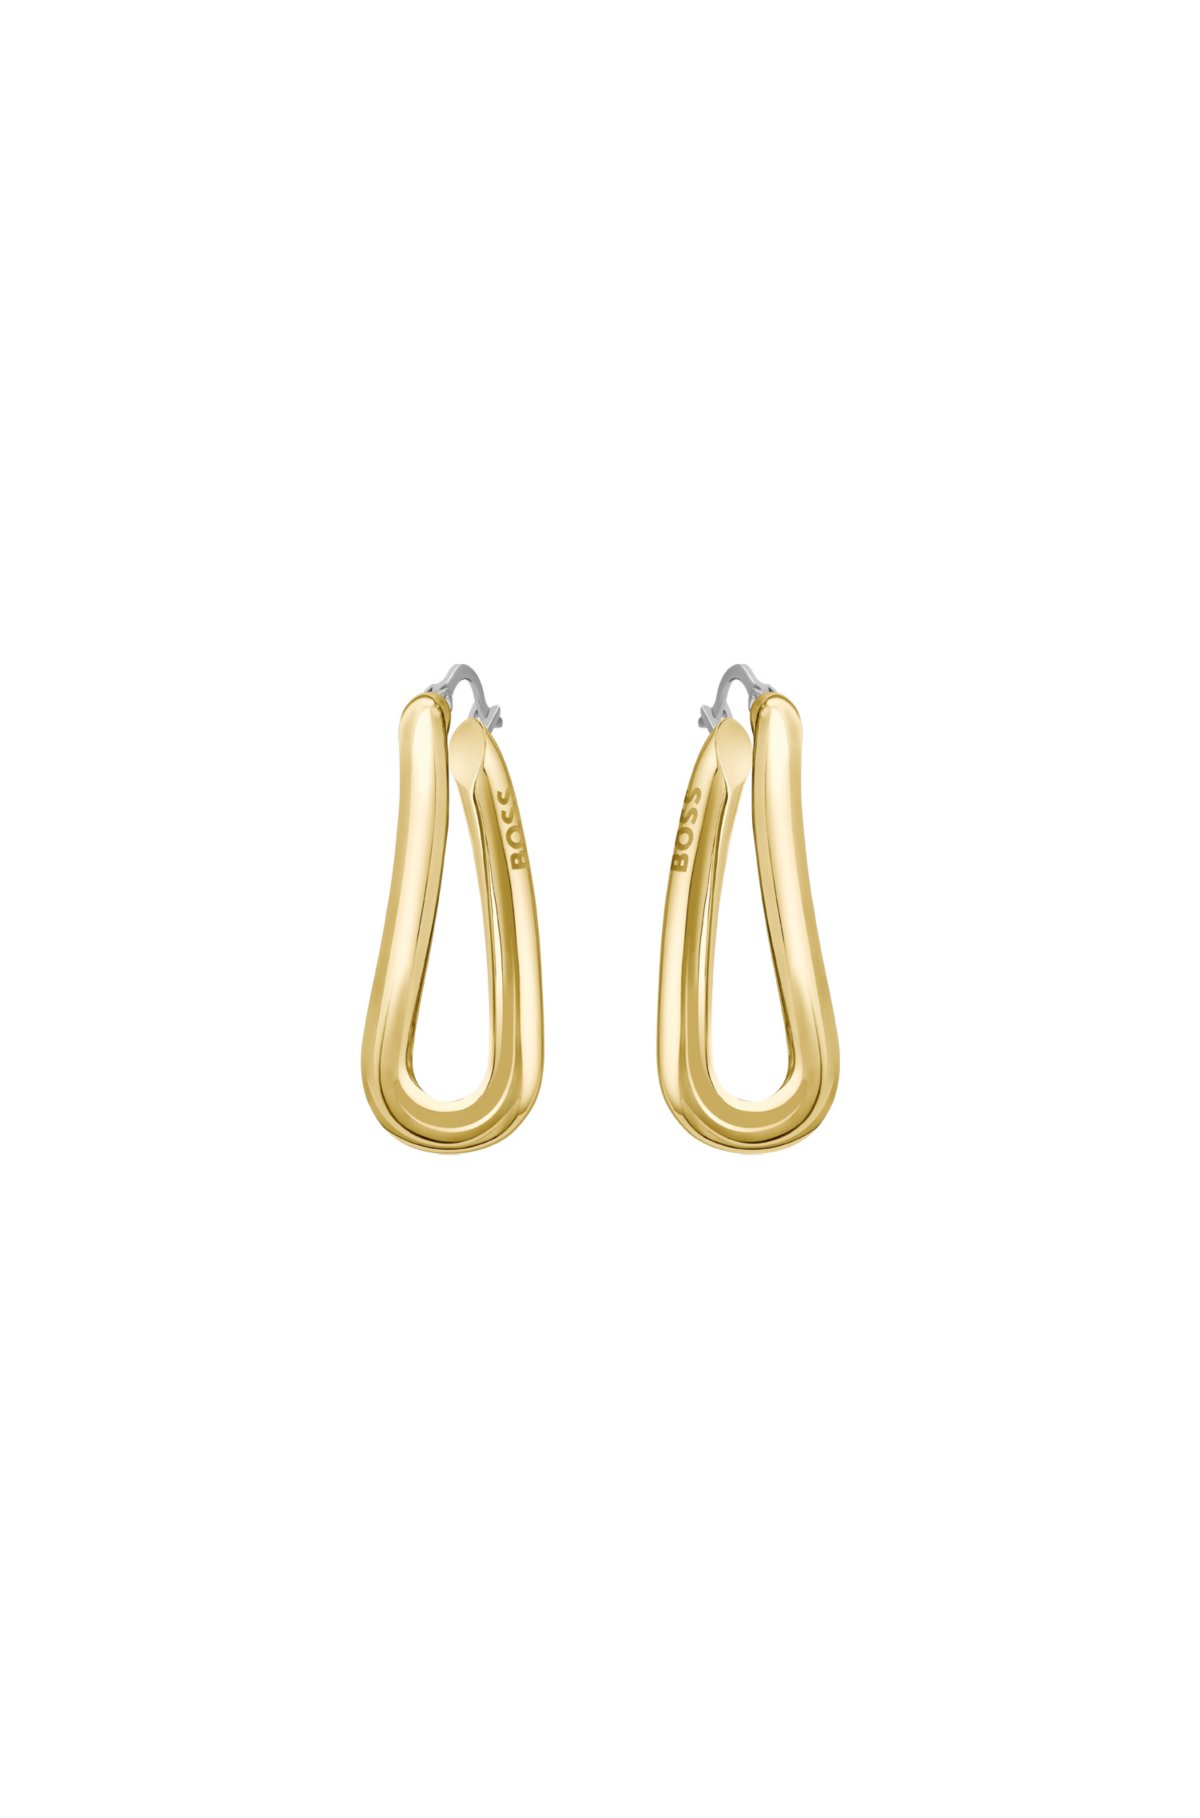 Gold-tone earrings with twisted tubular links, Gold